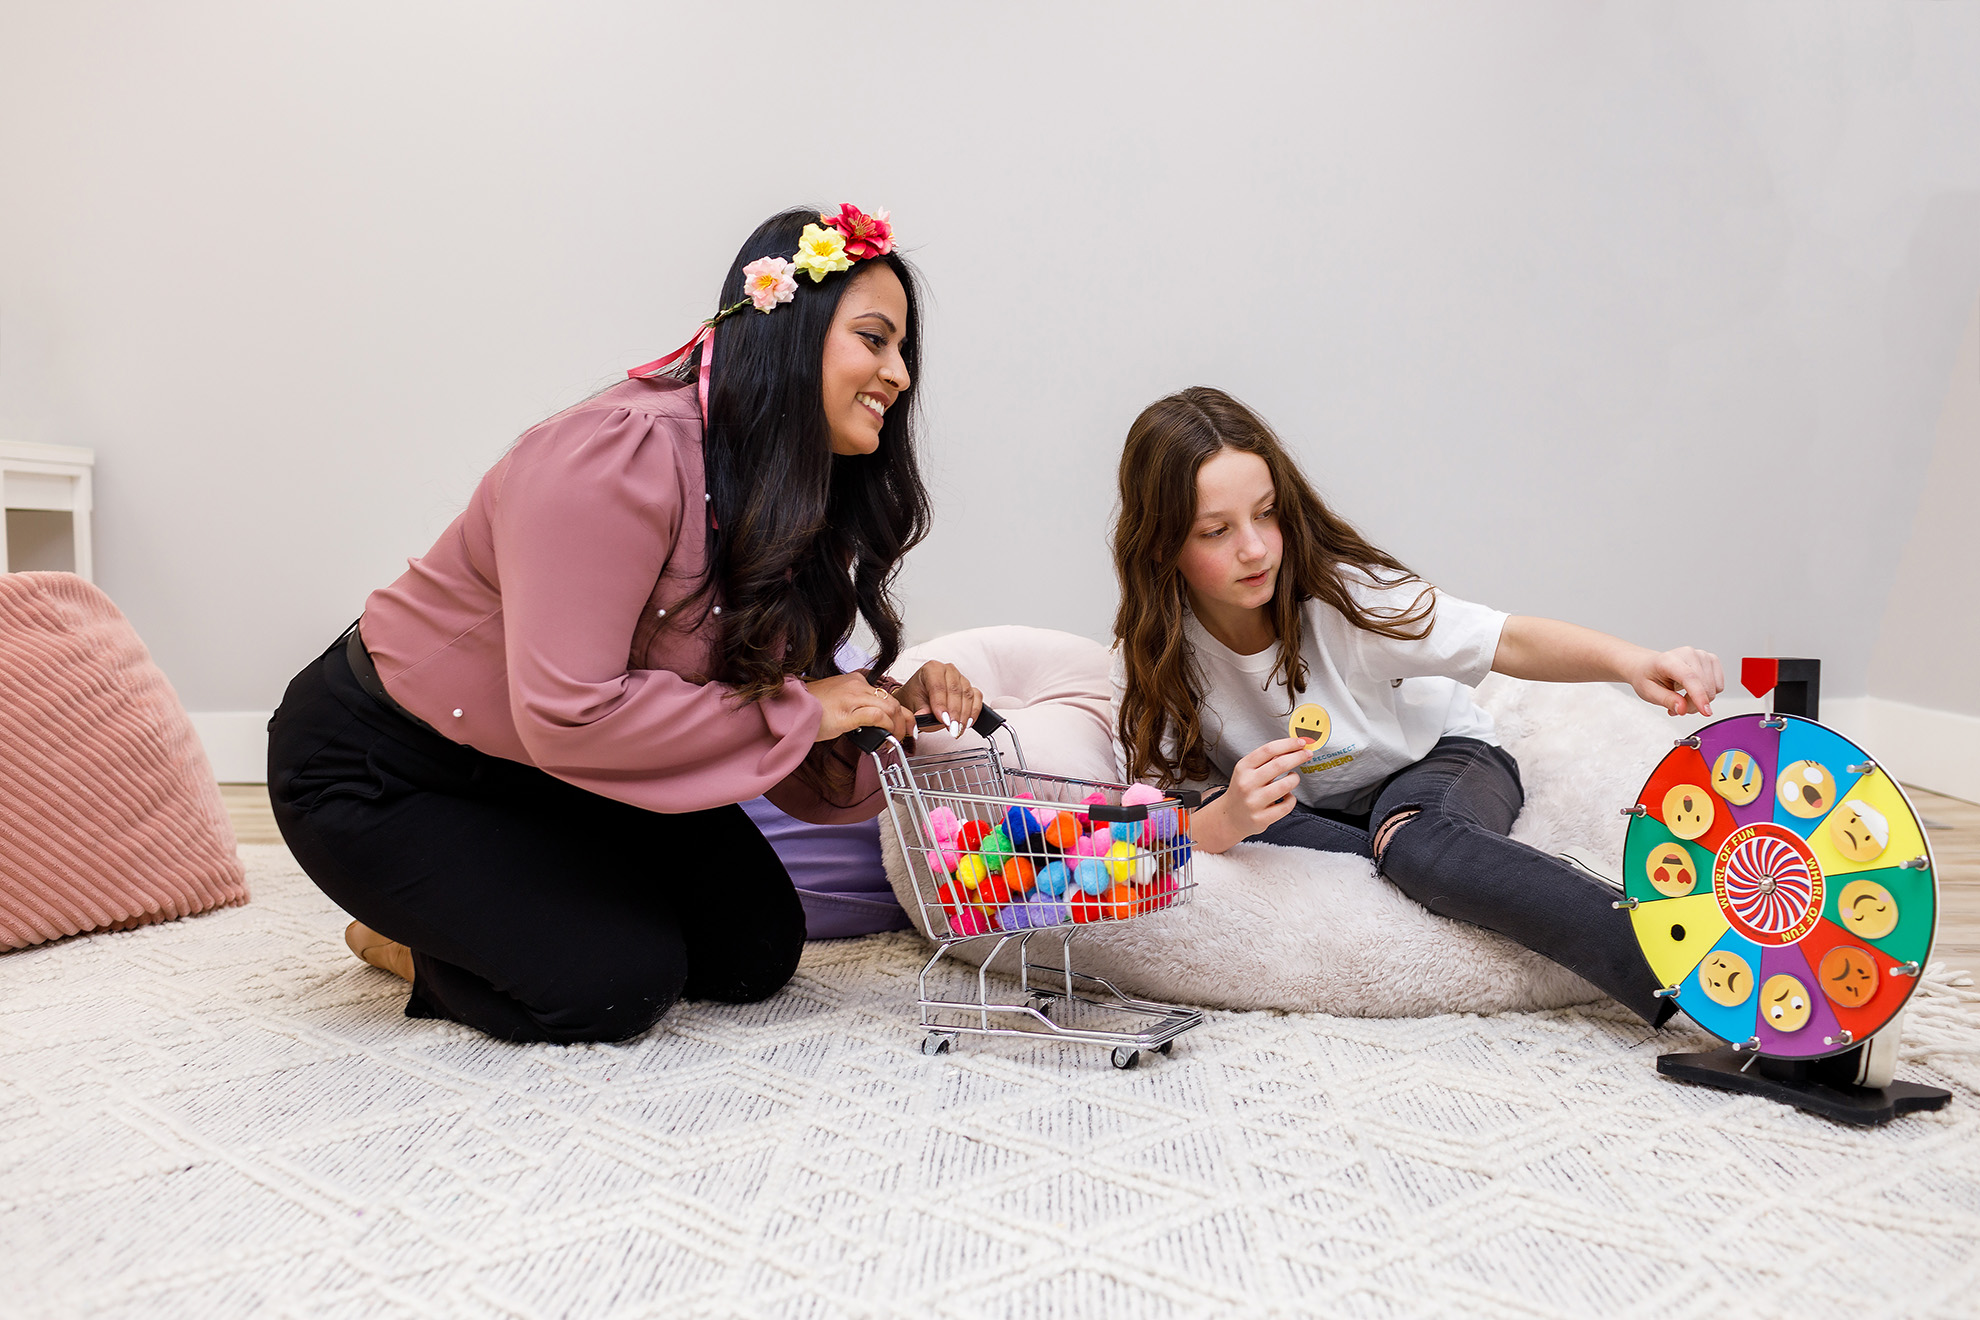 A child therapist and a child, sitting on a plush carpet. The therapist is holding a small toy shopping cart filled with coloured pompons; the young girl is spinning a wheel with different feelings emojis (smiling, love eyes, sad, etc.)